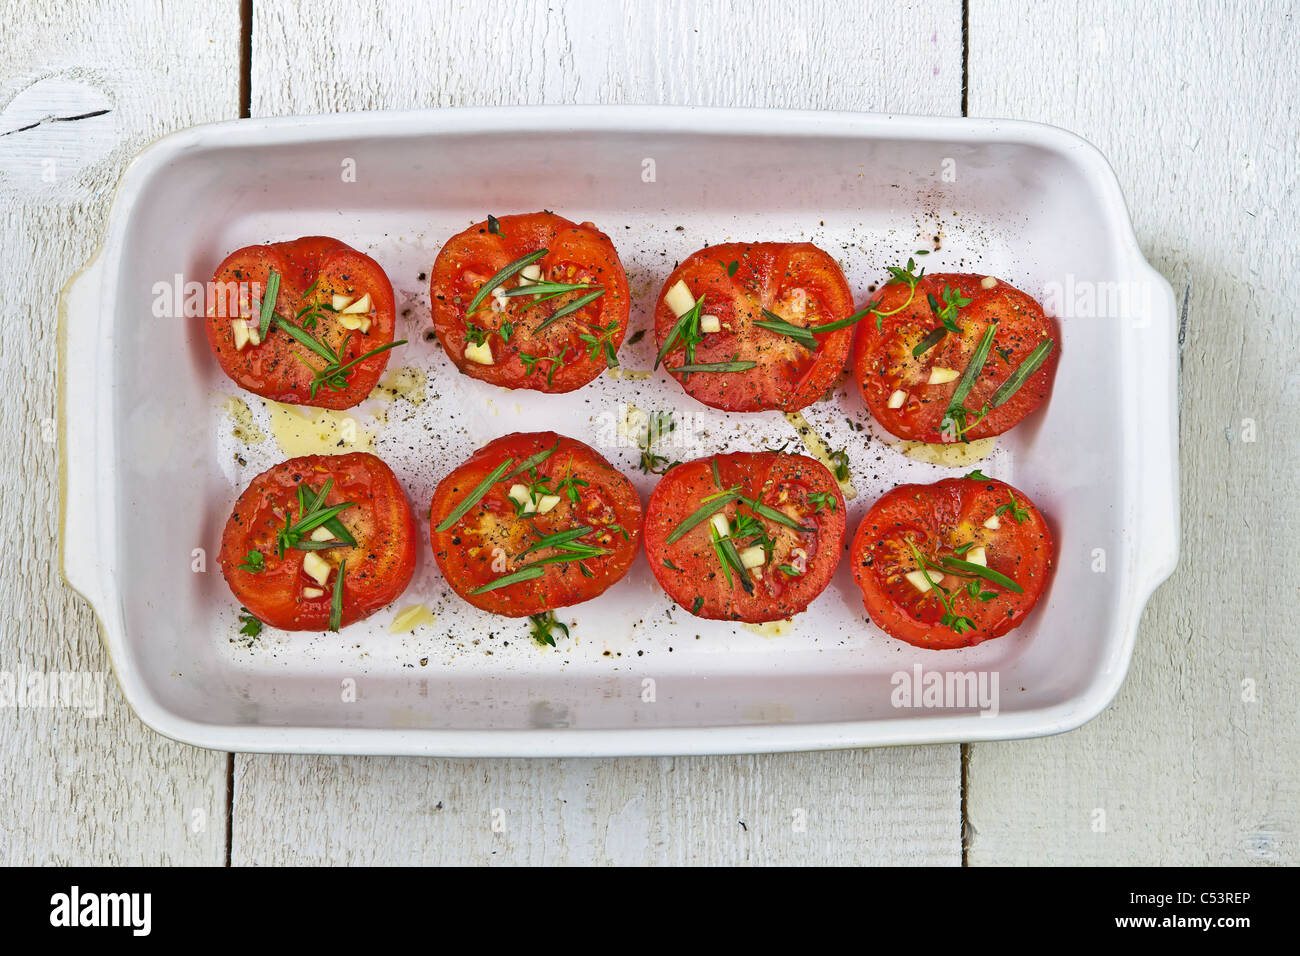 baked tomatoes in a white casserole Stock Photo